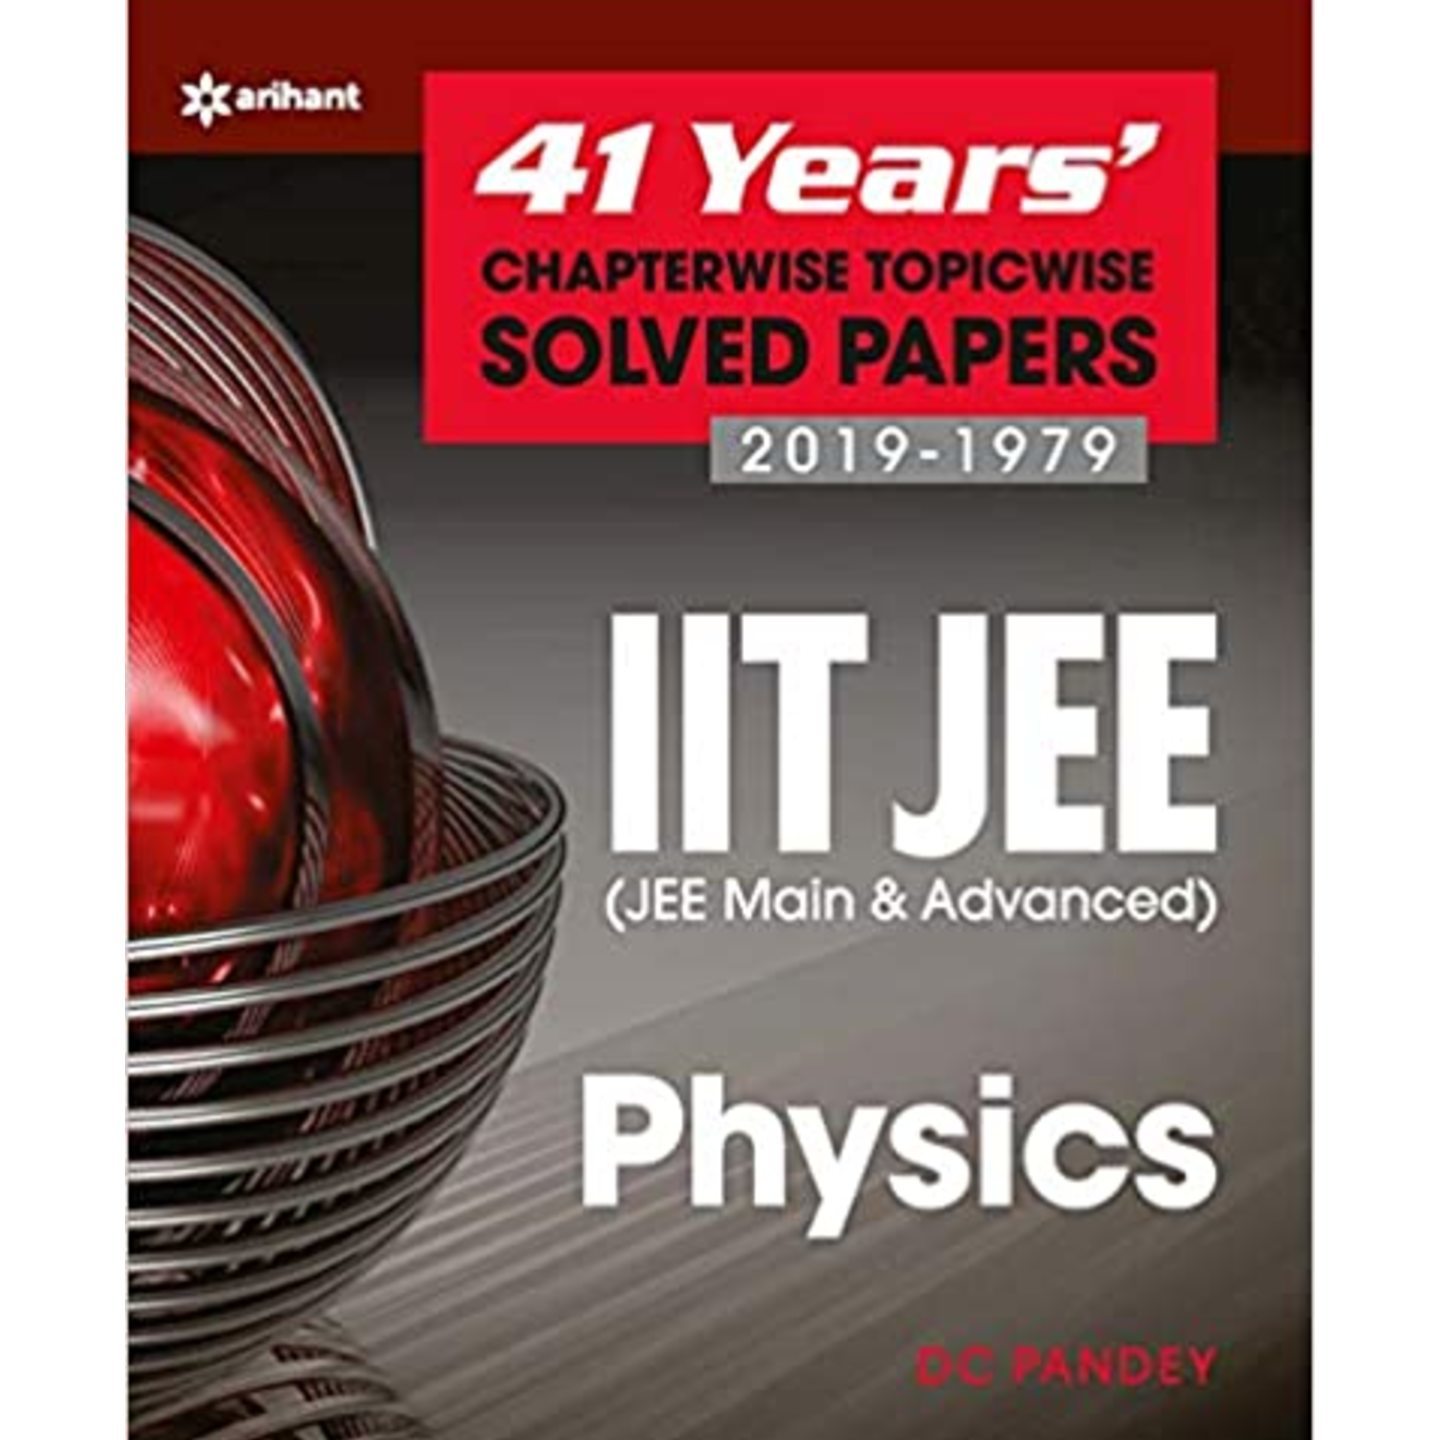 ARIHANT 41 Years Chapterwise Topicwise Solved Papers